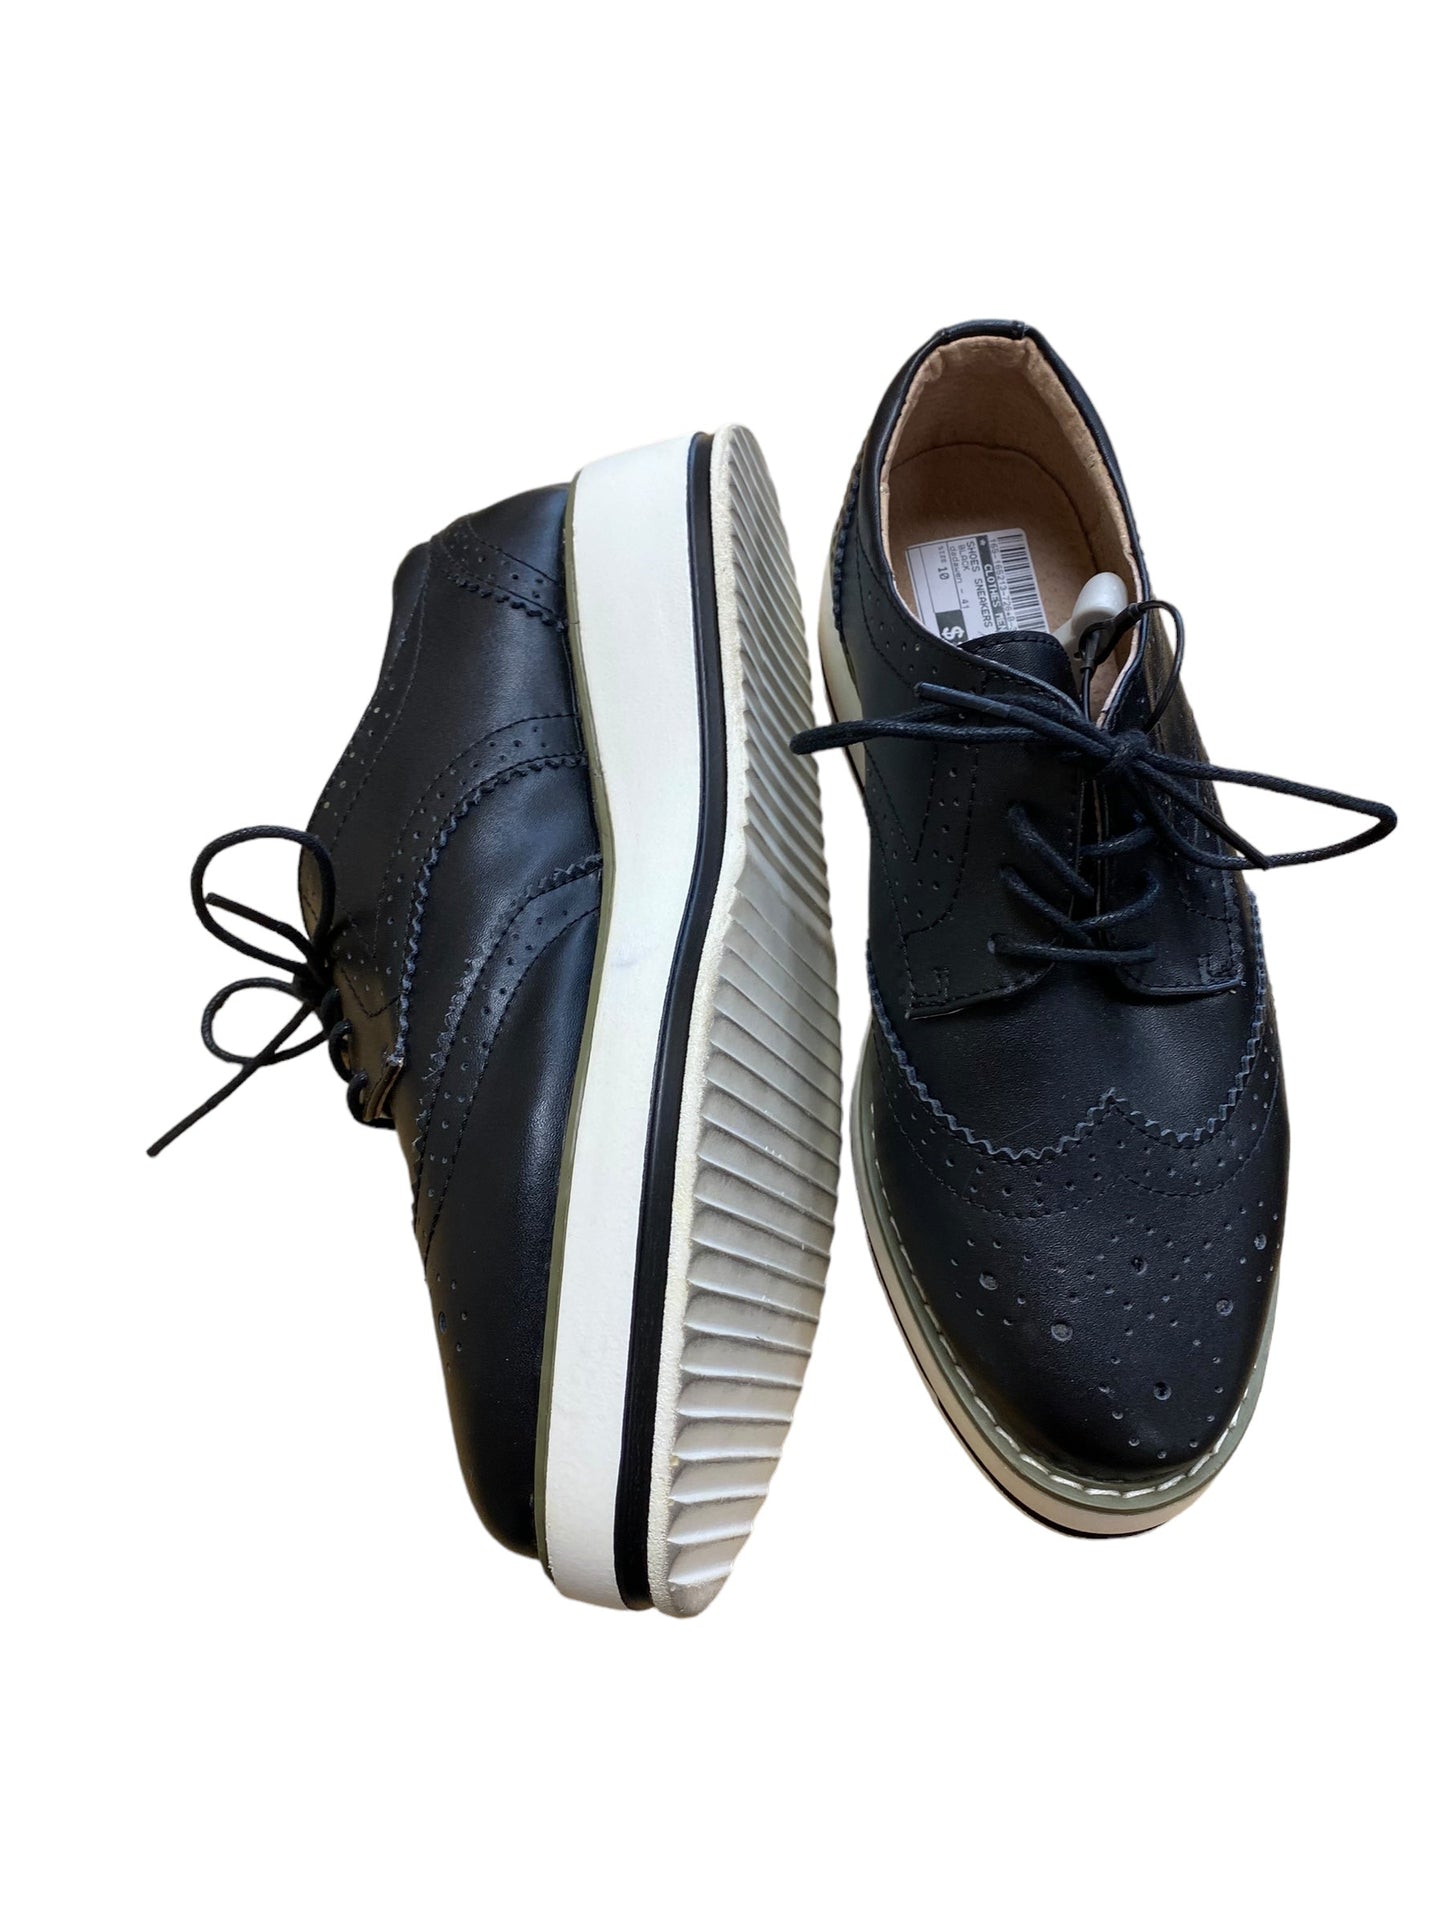 Black Shoes Sneakers Clothes Mentor, Size 10